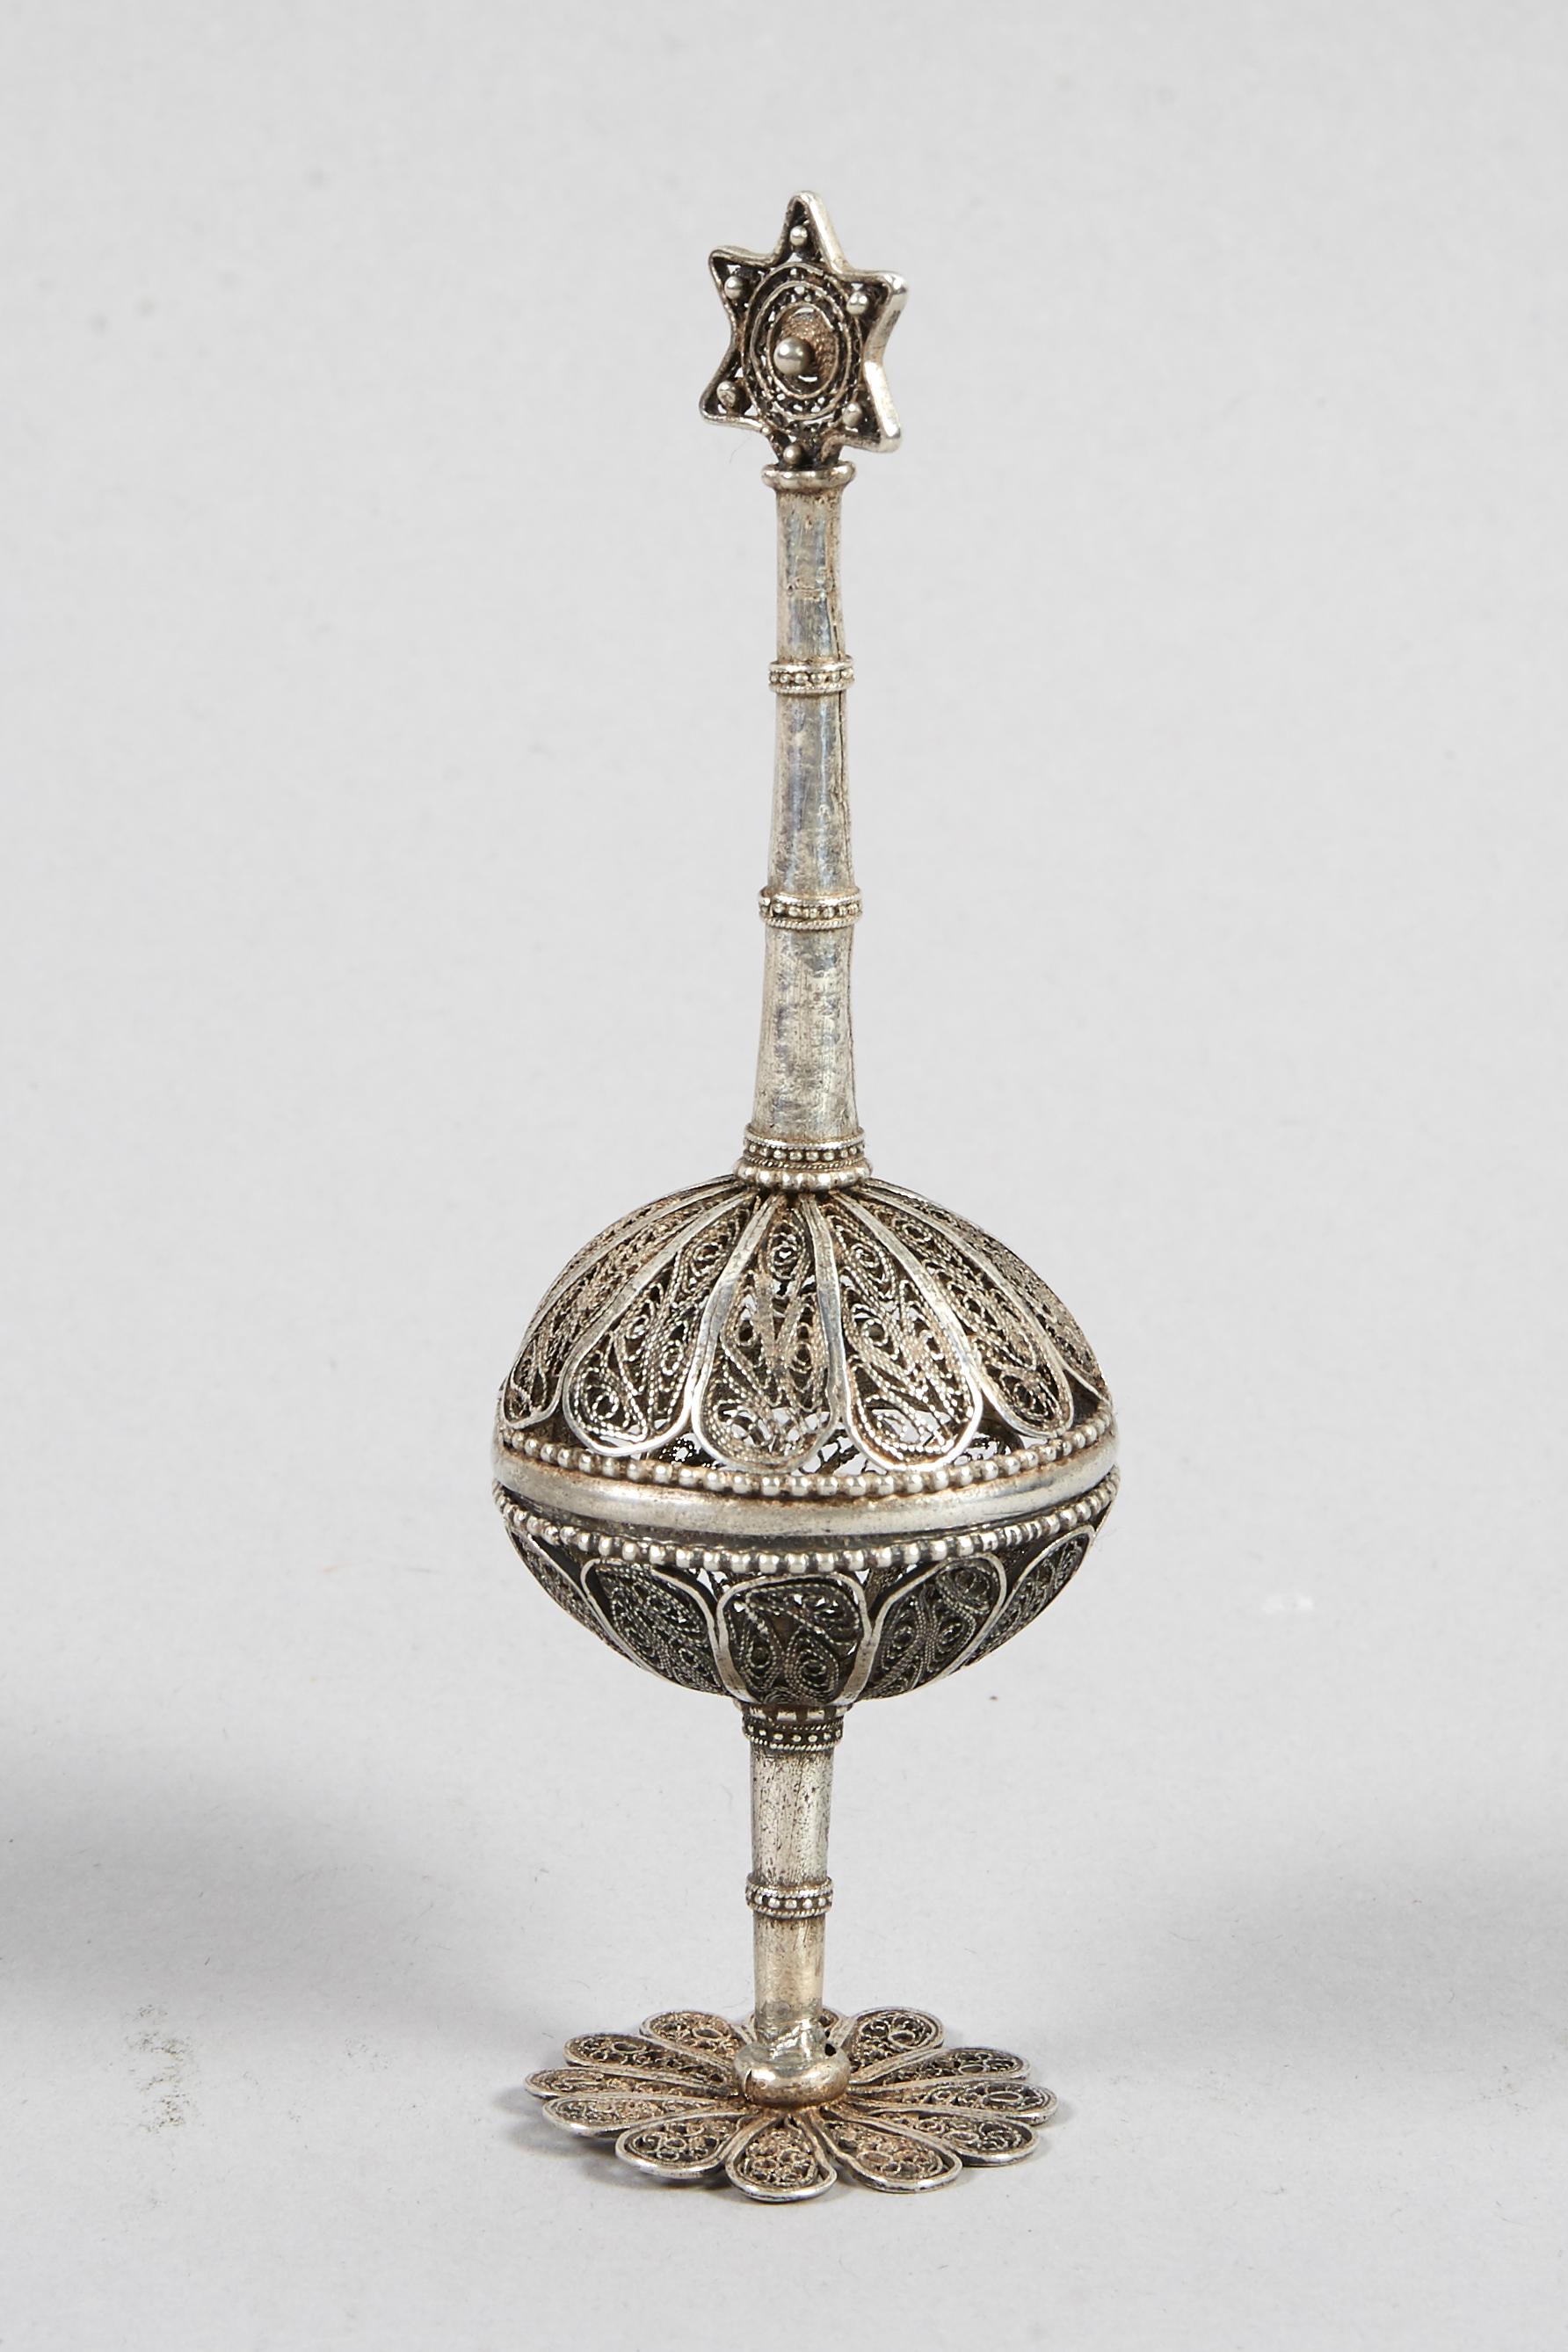 Silver and silver filigree spice container, Jerusalem, circa 1920. 
Ball spice container raised on a stem, on a flat filigree foot, the lid is surmounted by a Star of David.
Typical Bezalel school design. 

